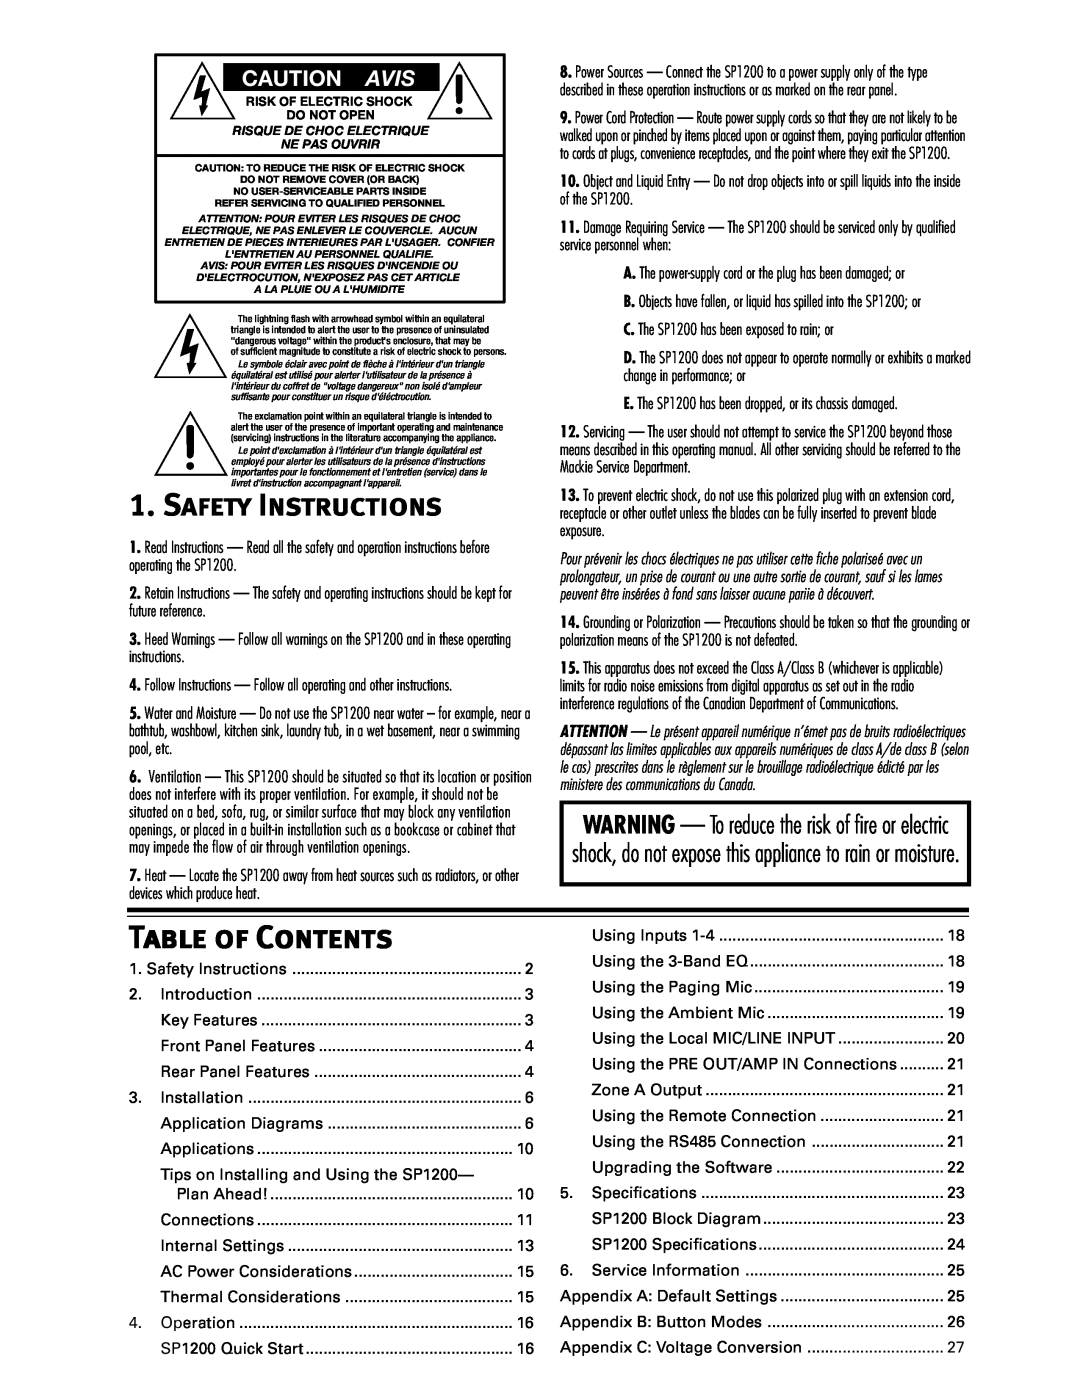 Mackie SP1200 user service Safety Instructions, Table of Contents, Caution Avis 